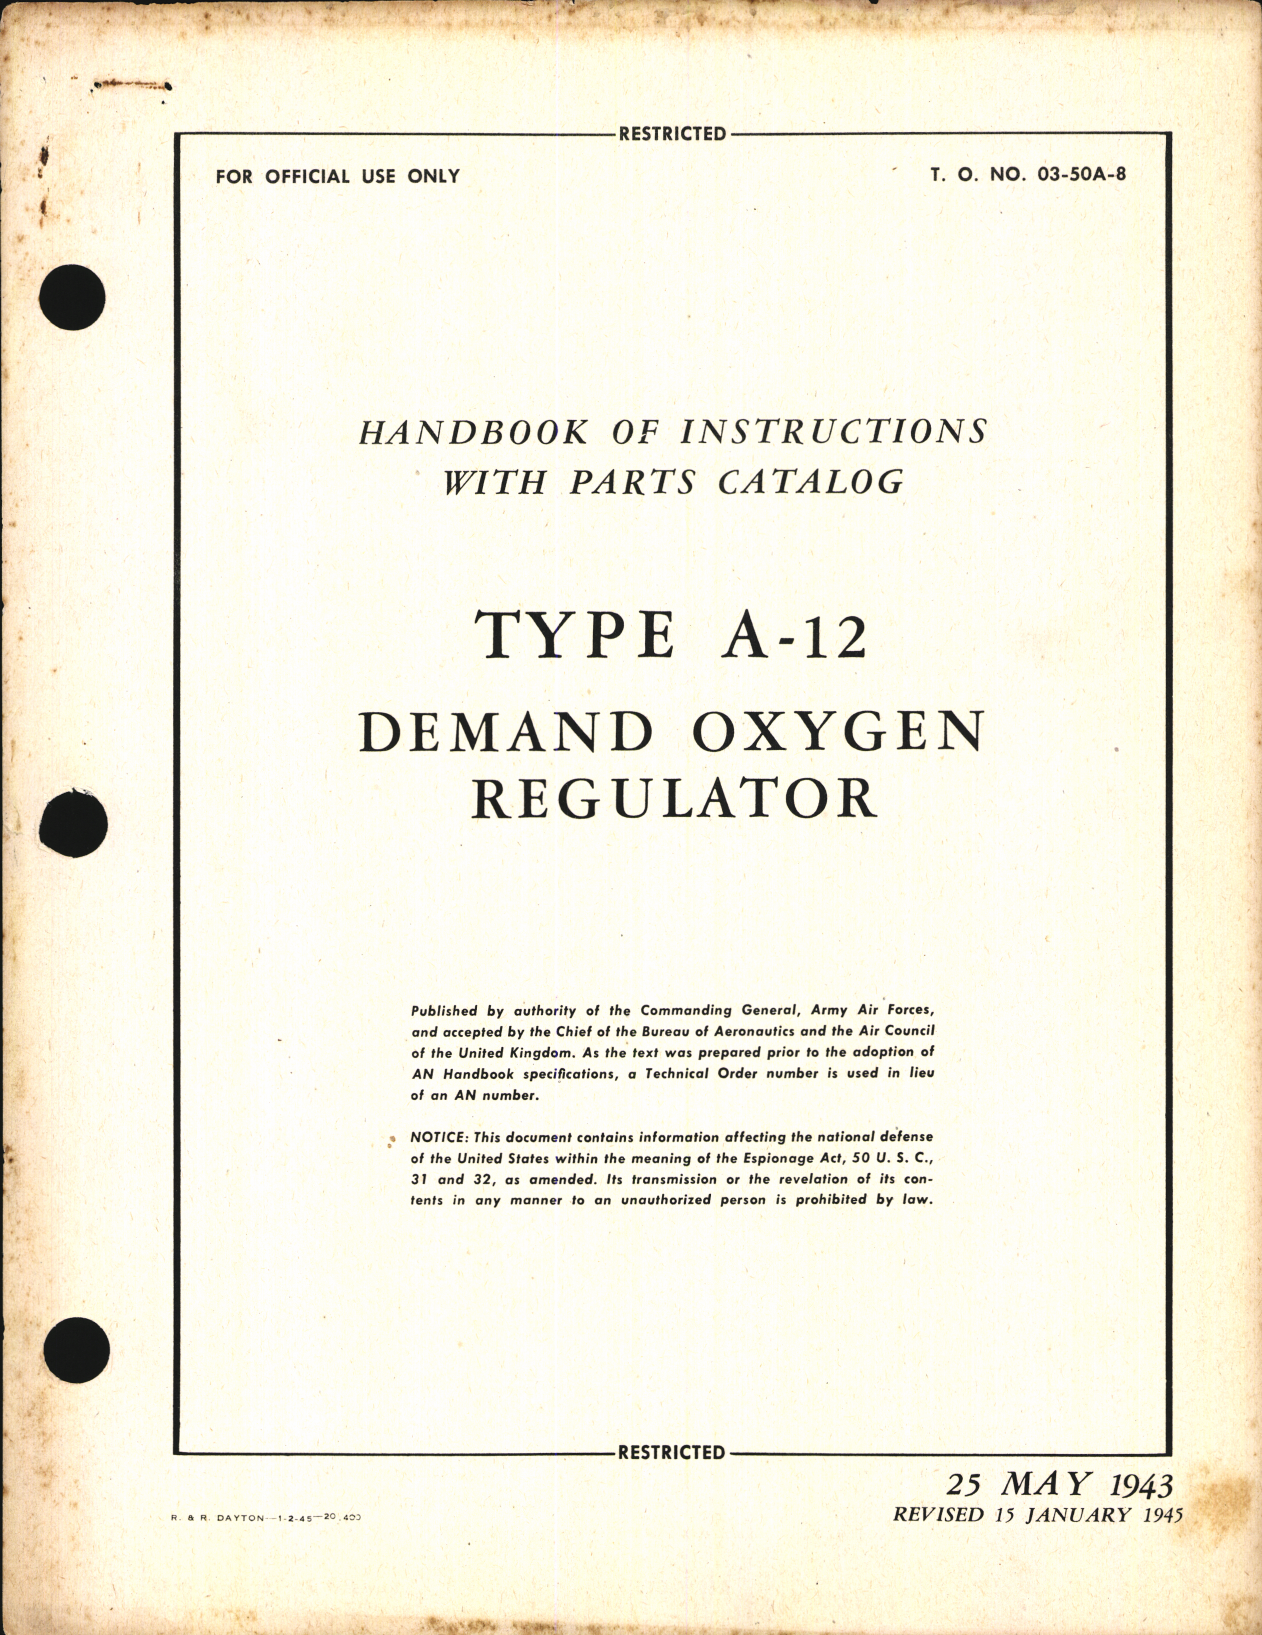 Sample page 1 from AirCorps Library document: Handbook of Instructions with Parts Catalog for Type A-12 Demand Oxygen Regulator